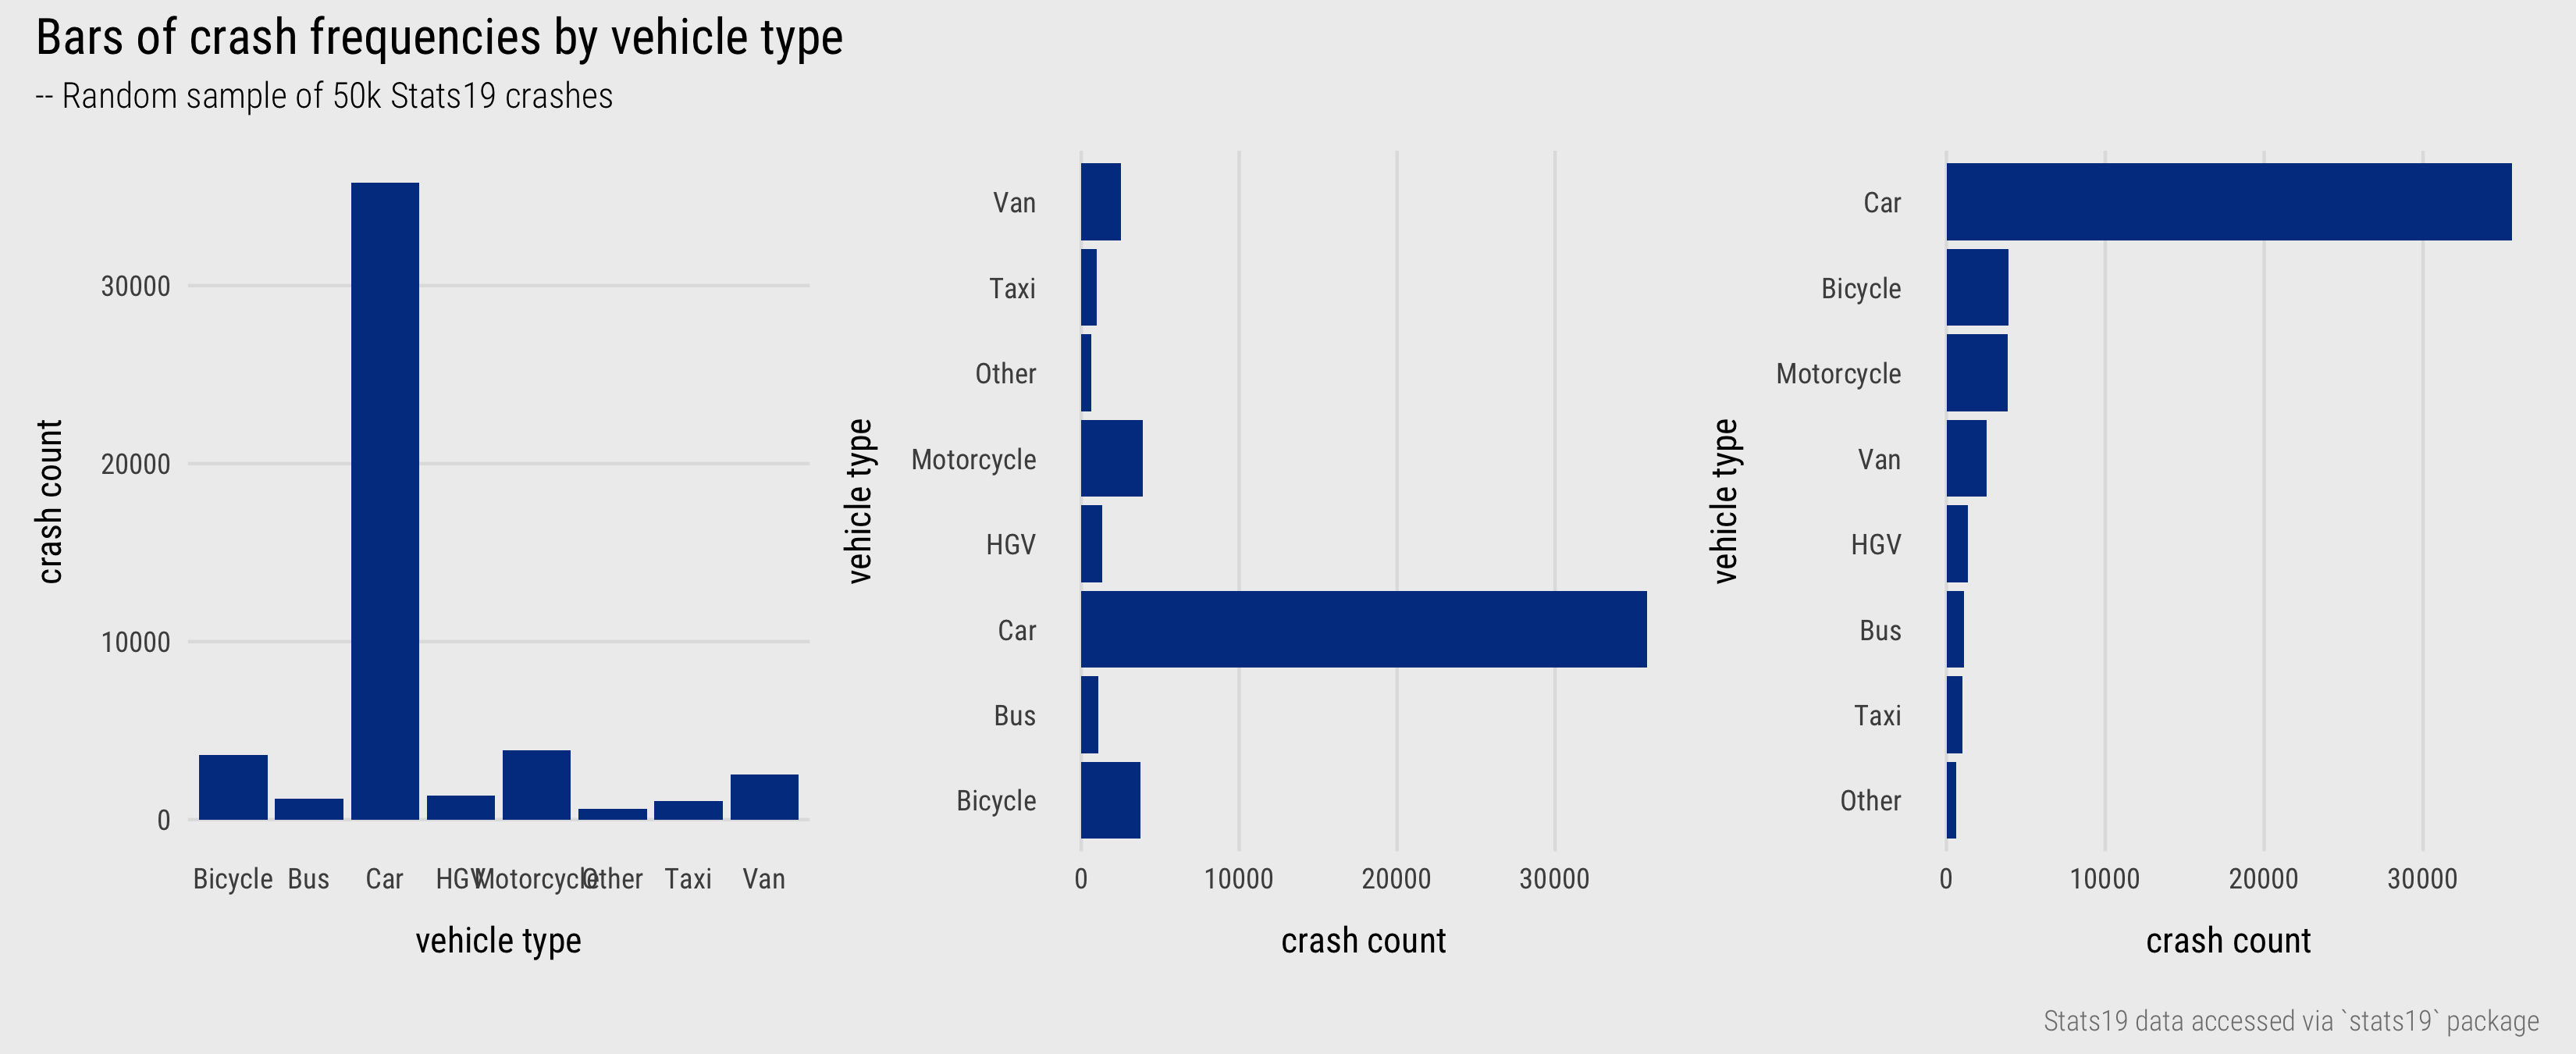 Bars displaying crash frequencies by vehicle type.